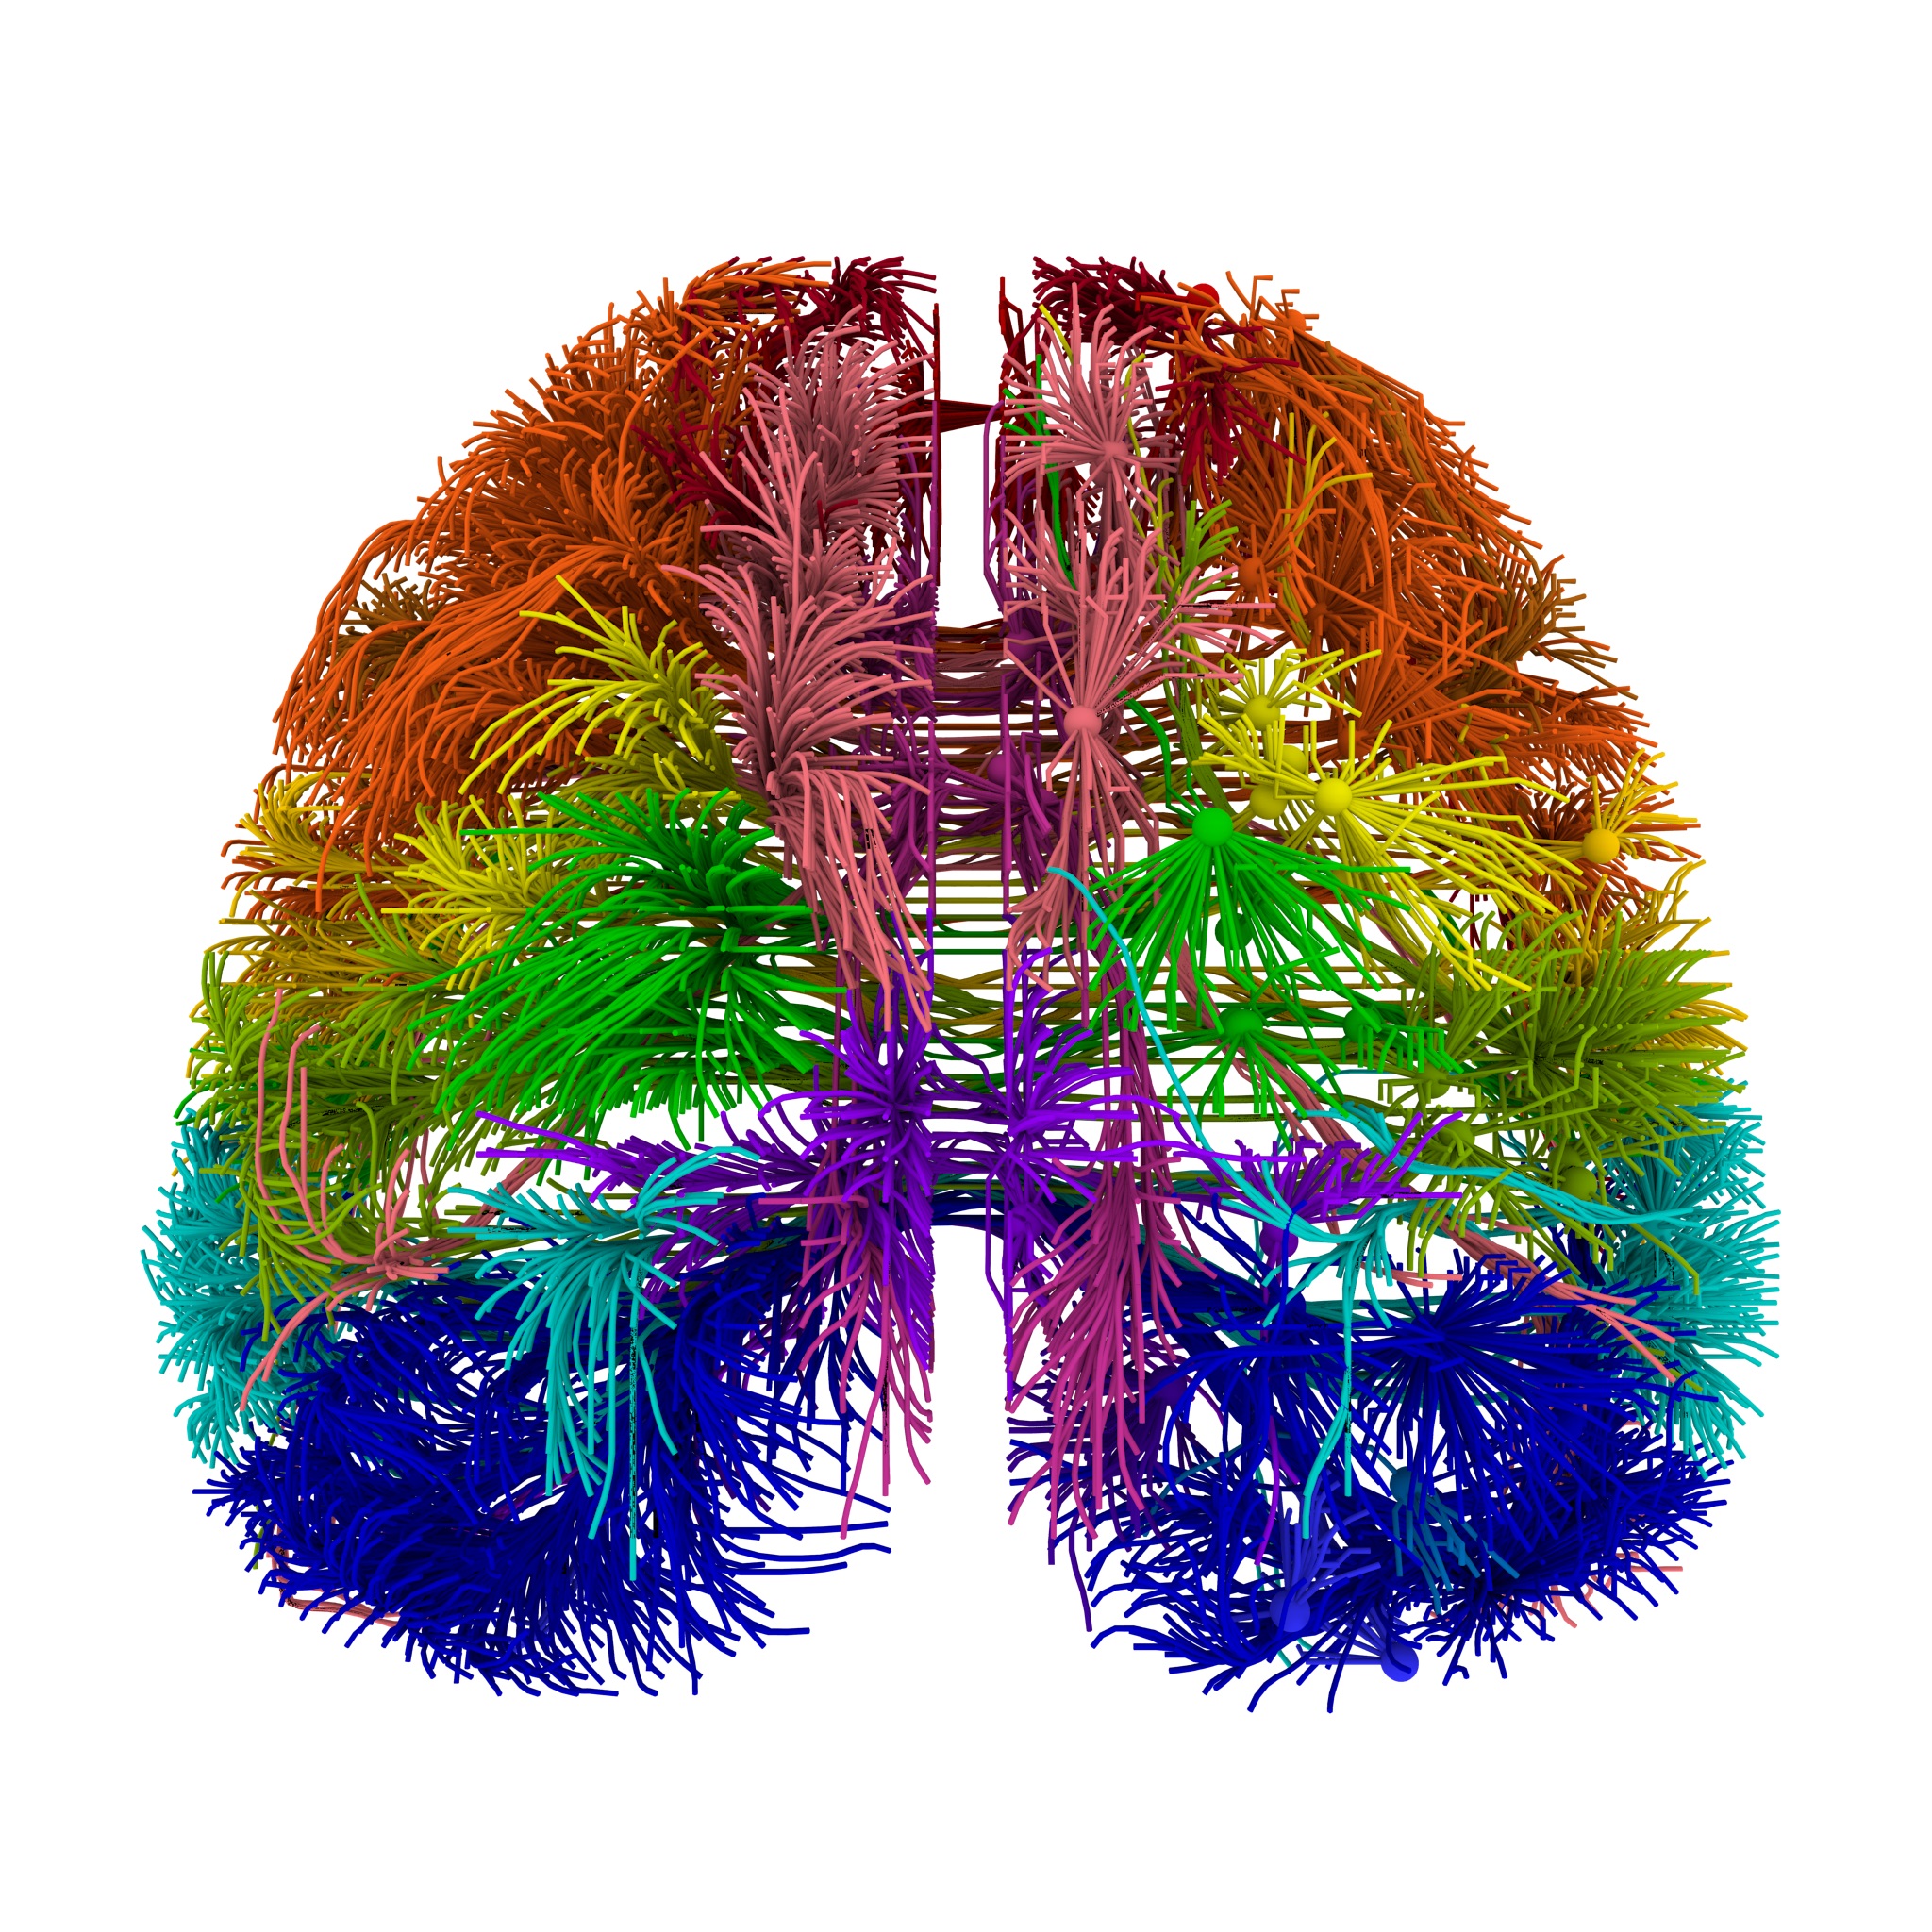 First Wiring Diagram of Mouse Brain Created - D-brief ...